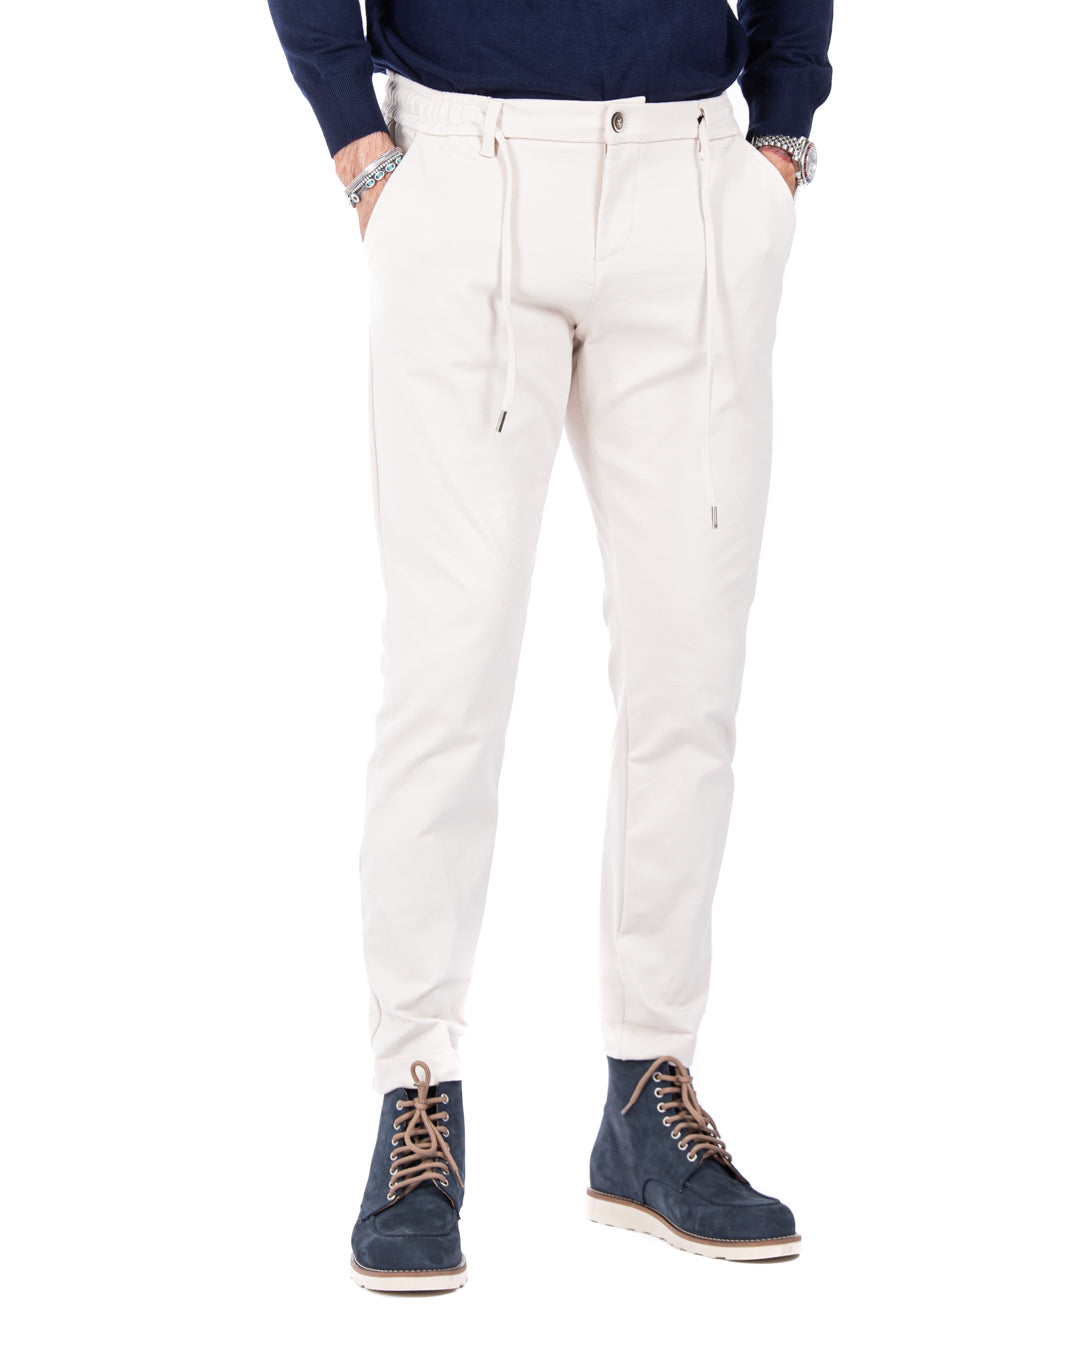 Mustang - cream milan stitch trousers